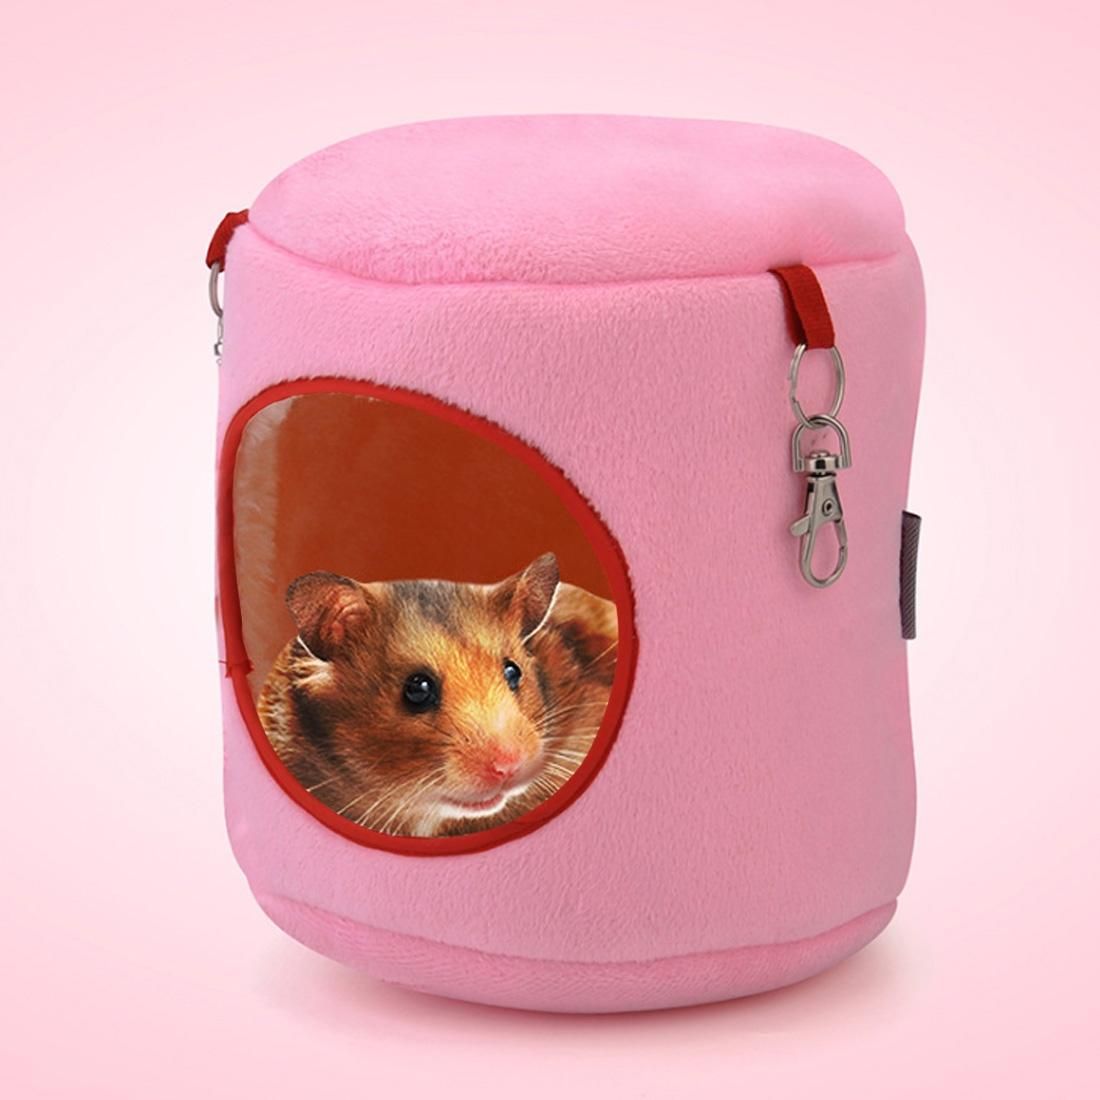 Flannel Cylinder Pet House Warm Hamster Hammock Hanging Bed Small Pets Nest, M, Size:10*12*12cm (Pink)